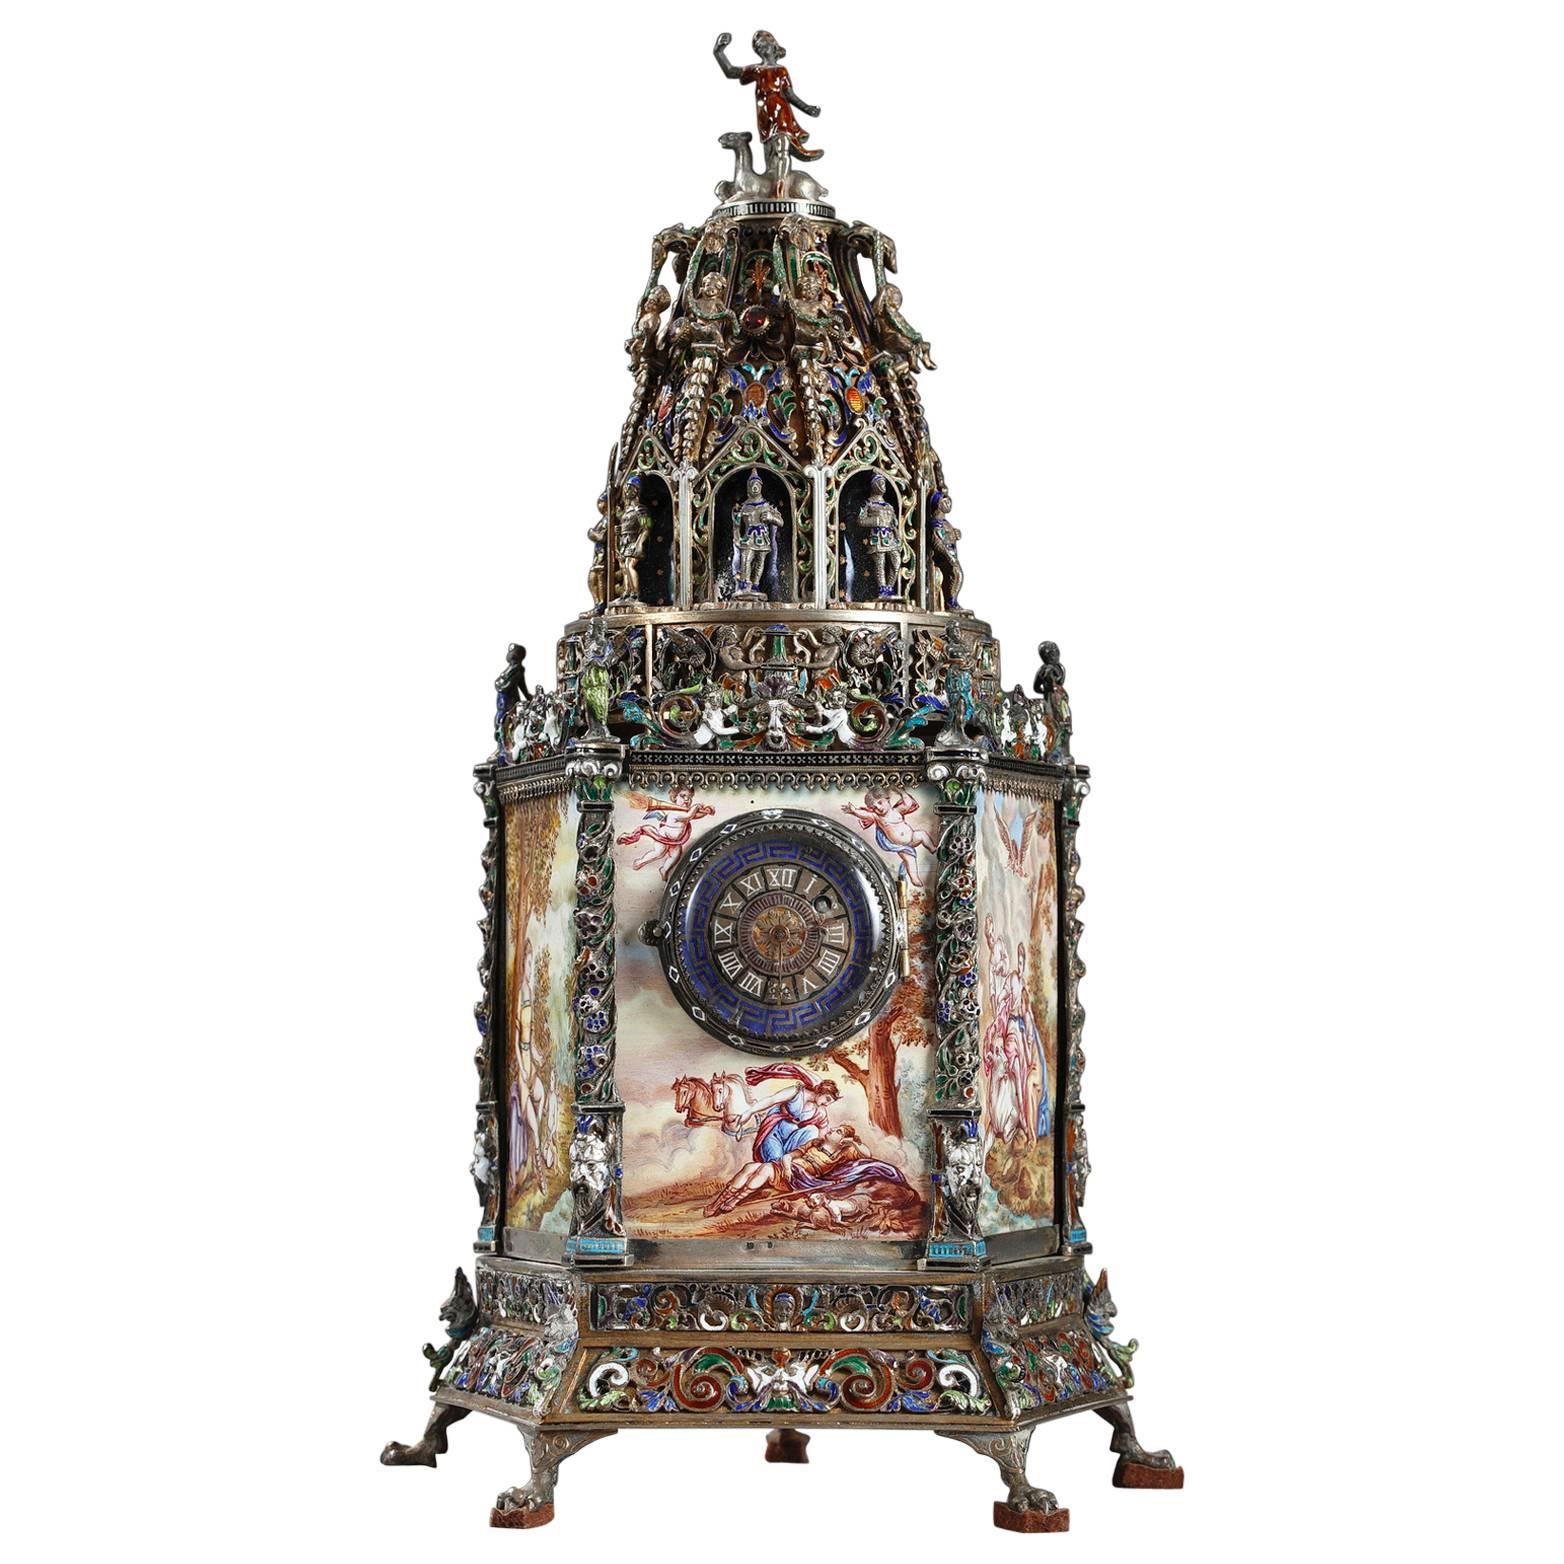 Viennese Enamel and Silver Clock